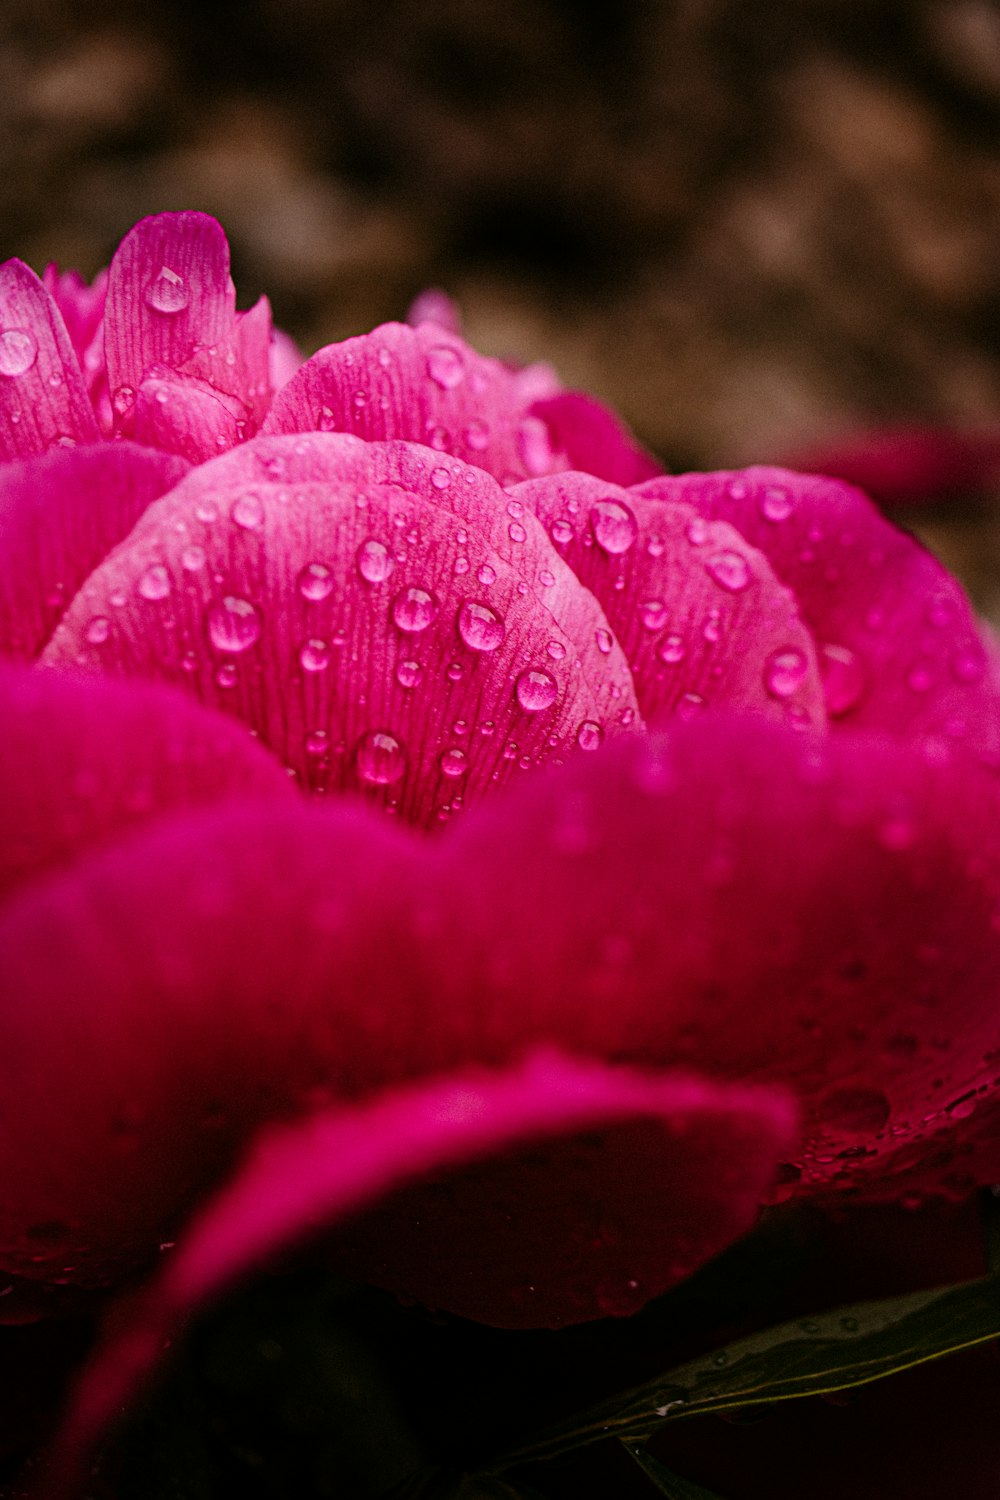 water droplets on red flower